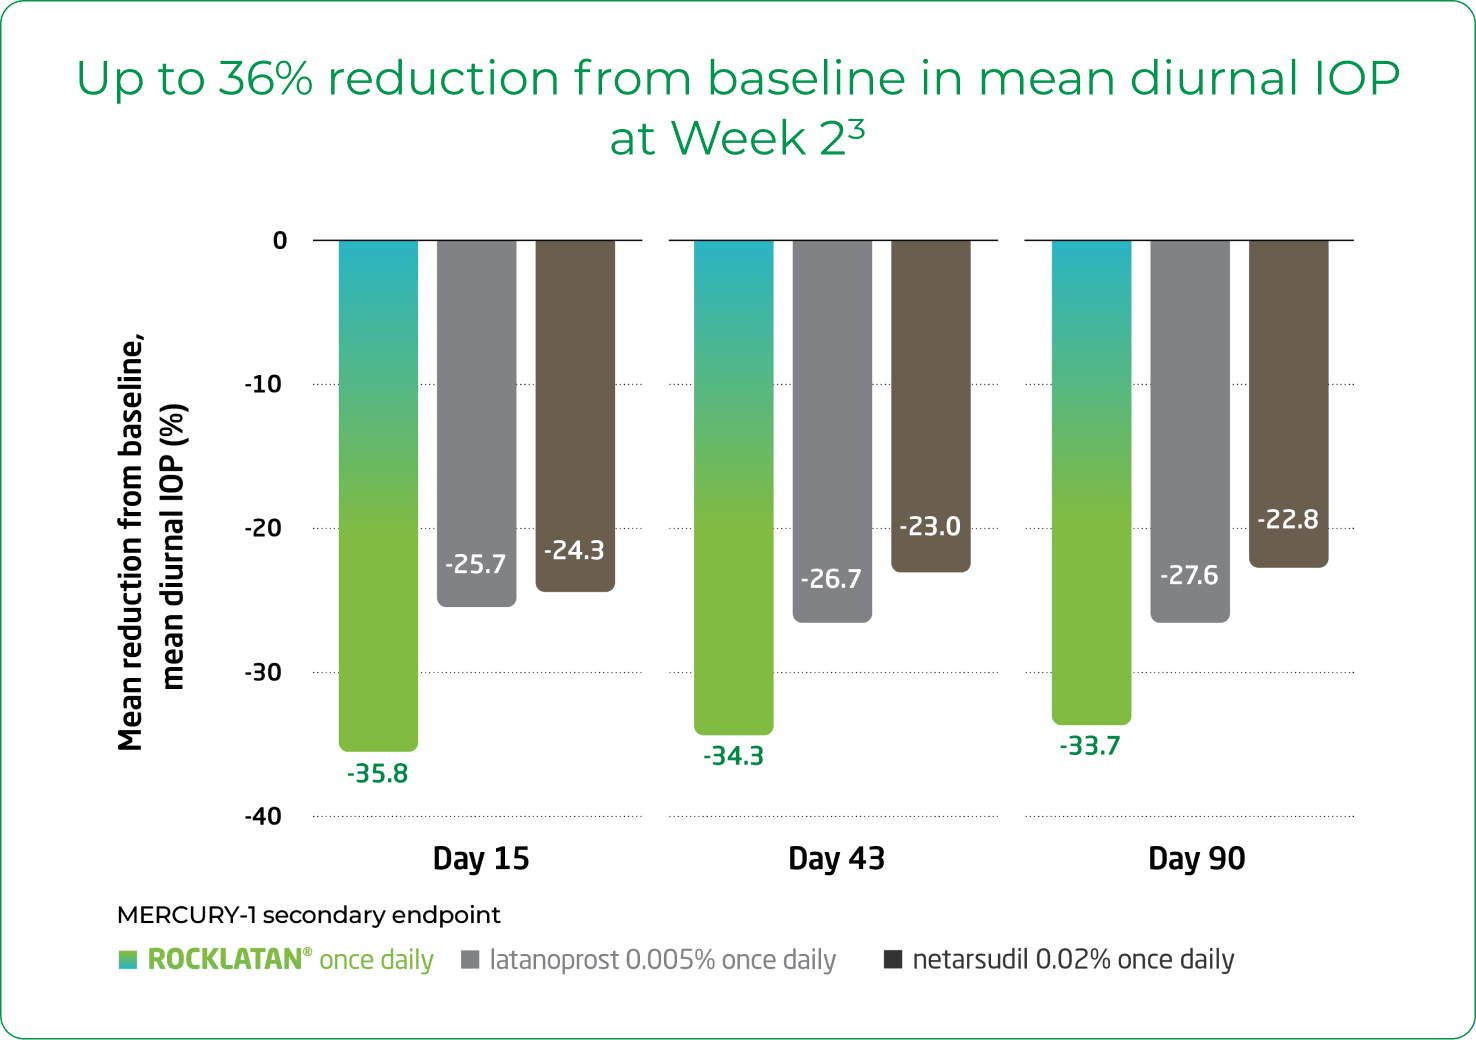 Up to 36% reduction from baseline in mean diurnal IOP at Week 2